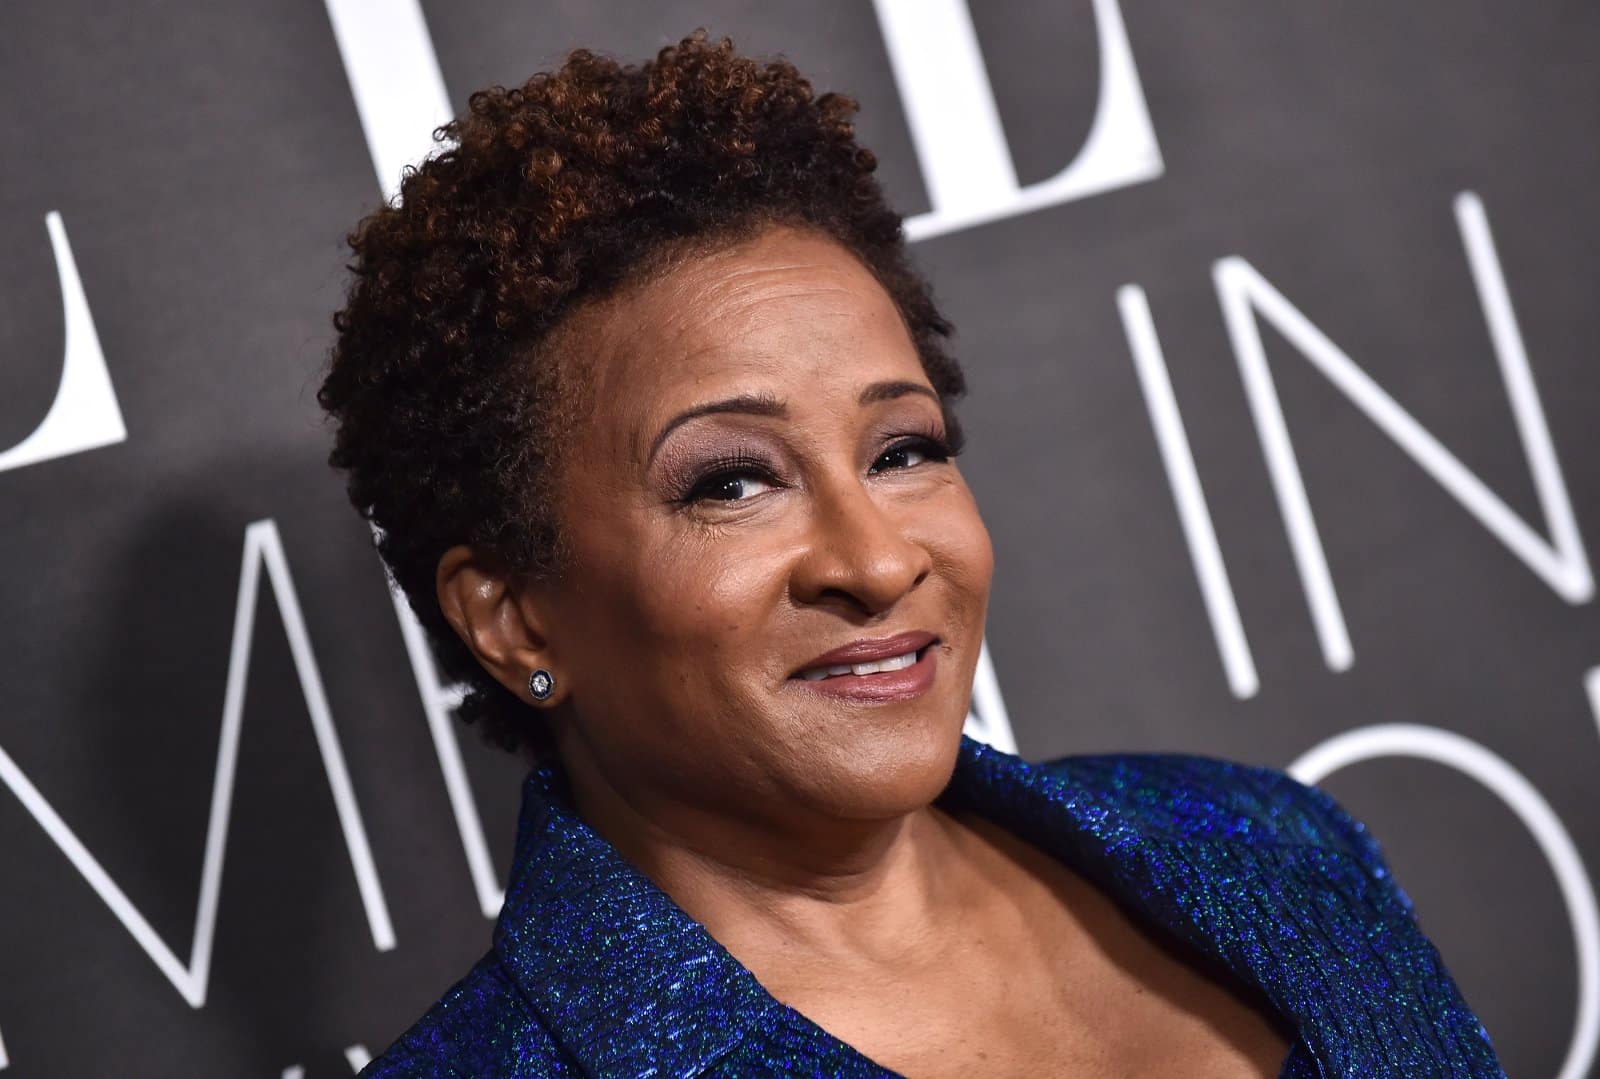 Image Credit: Shutterstock / DFree <p><span>In a heartfelt speech at the Equality California Awards in 2010, comedian Wanda Sykes shared her personal story of coming out and how it influenced her advocacy work, emphasizing the importance of legal protections for LGBTQ+ people.</span></p>